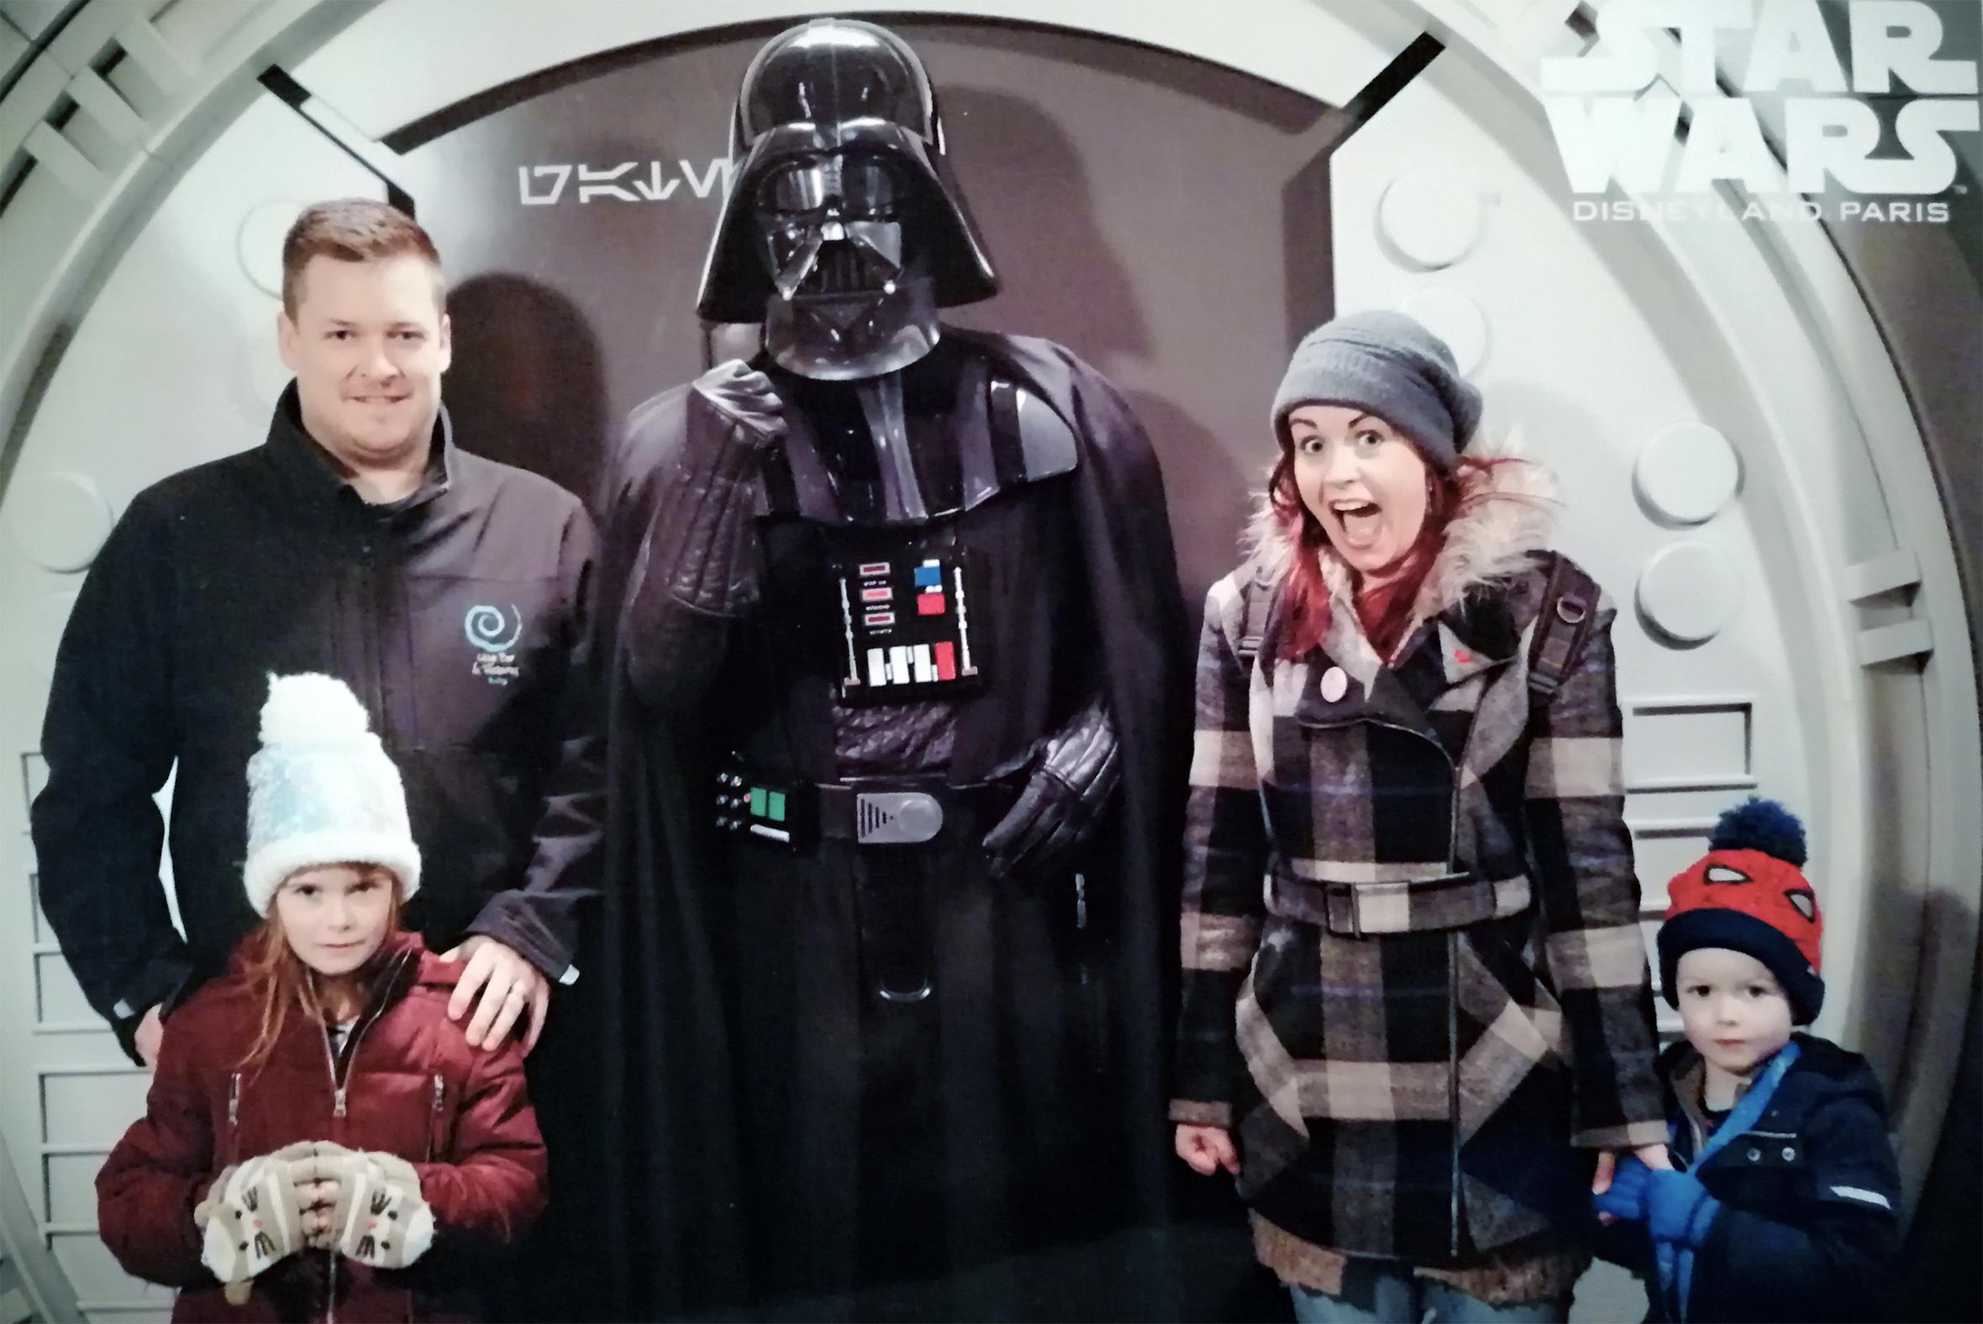 Ezekiel and family standing with Darth Vader